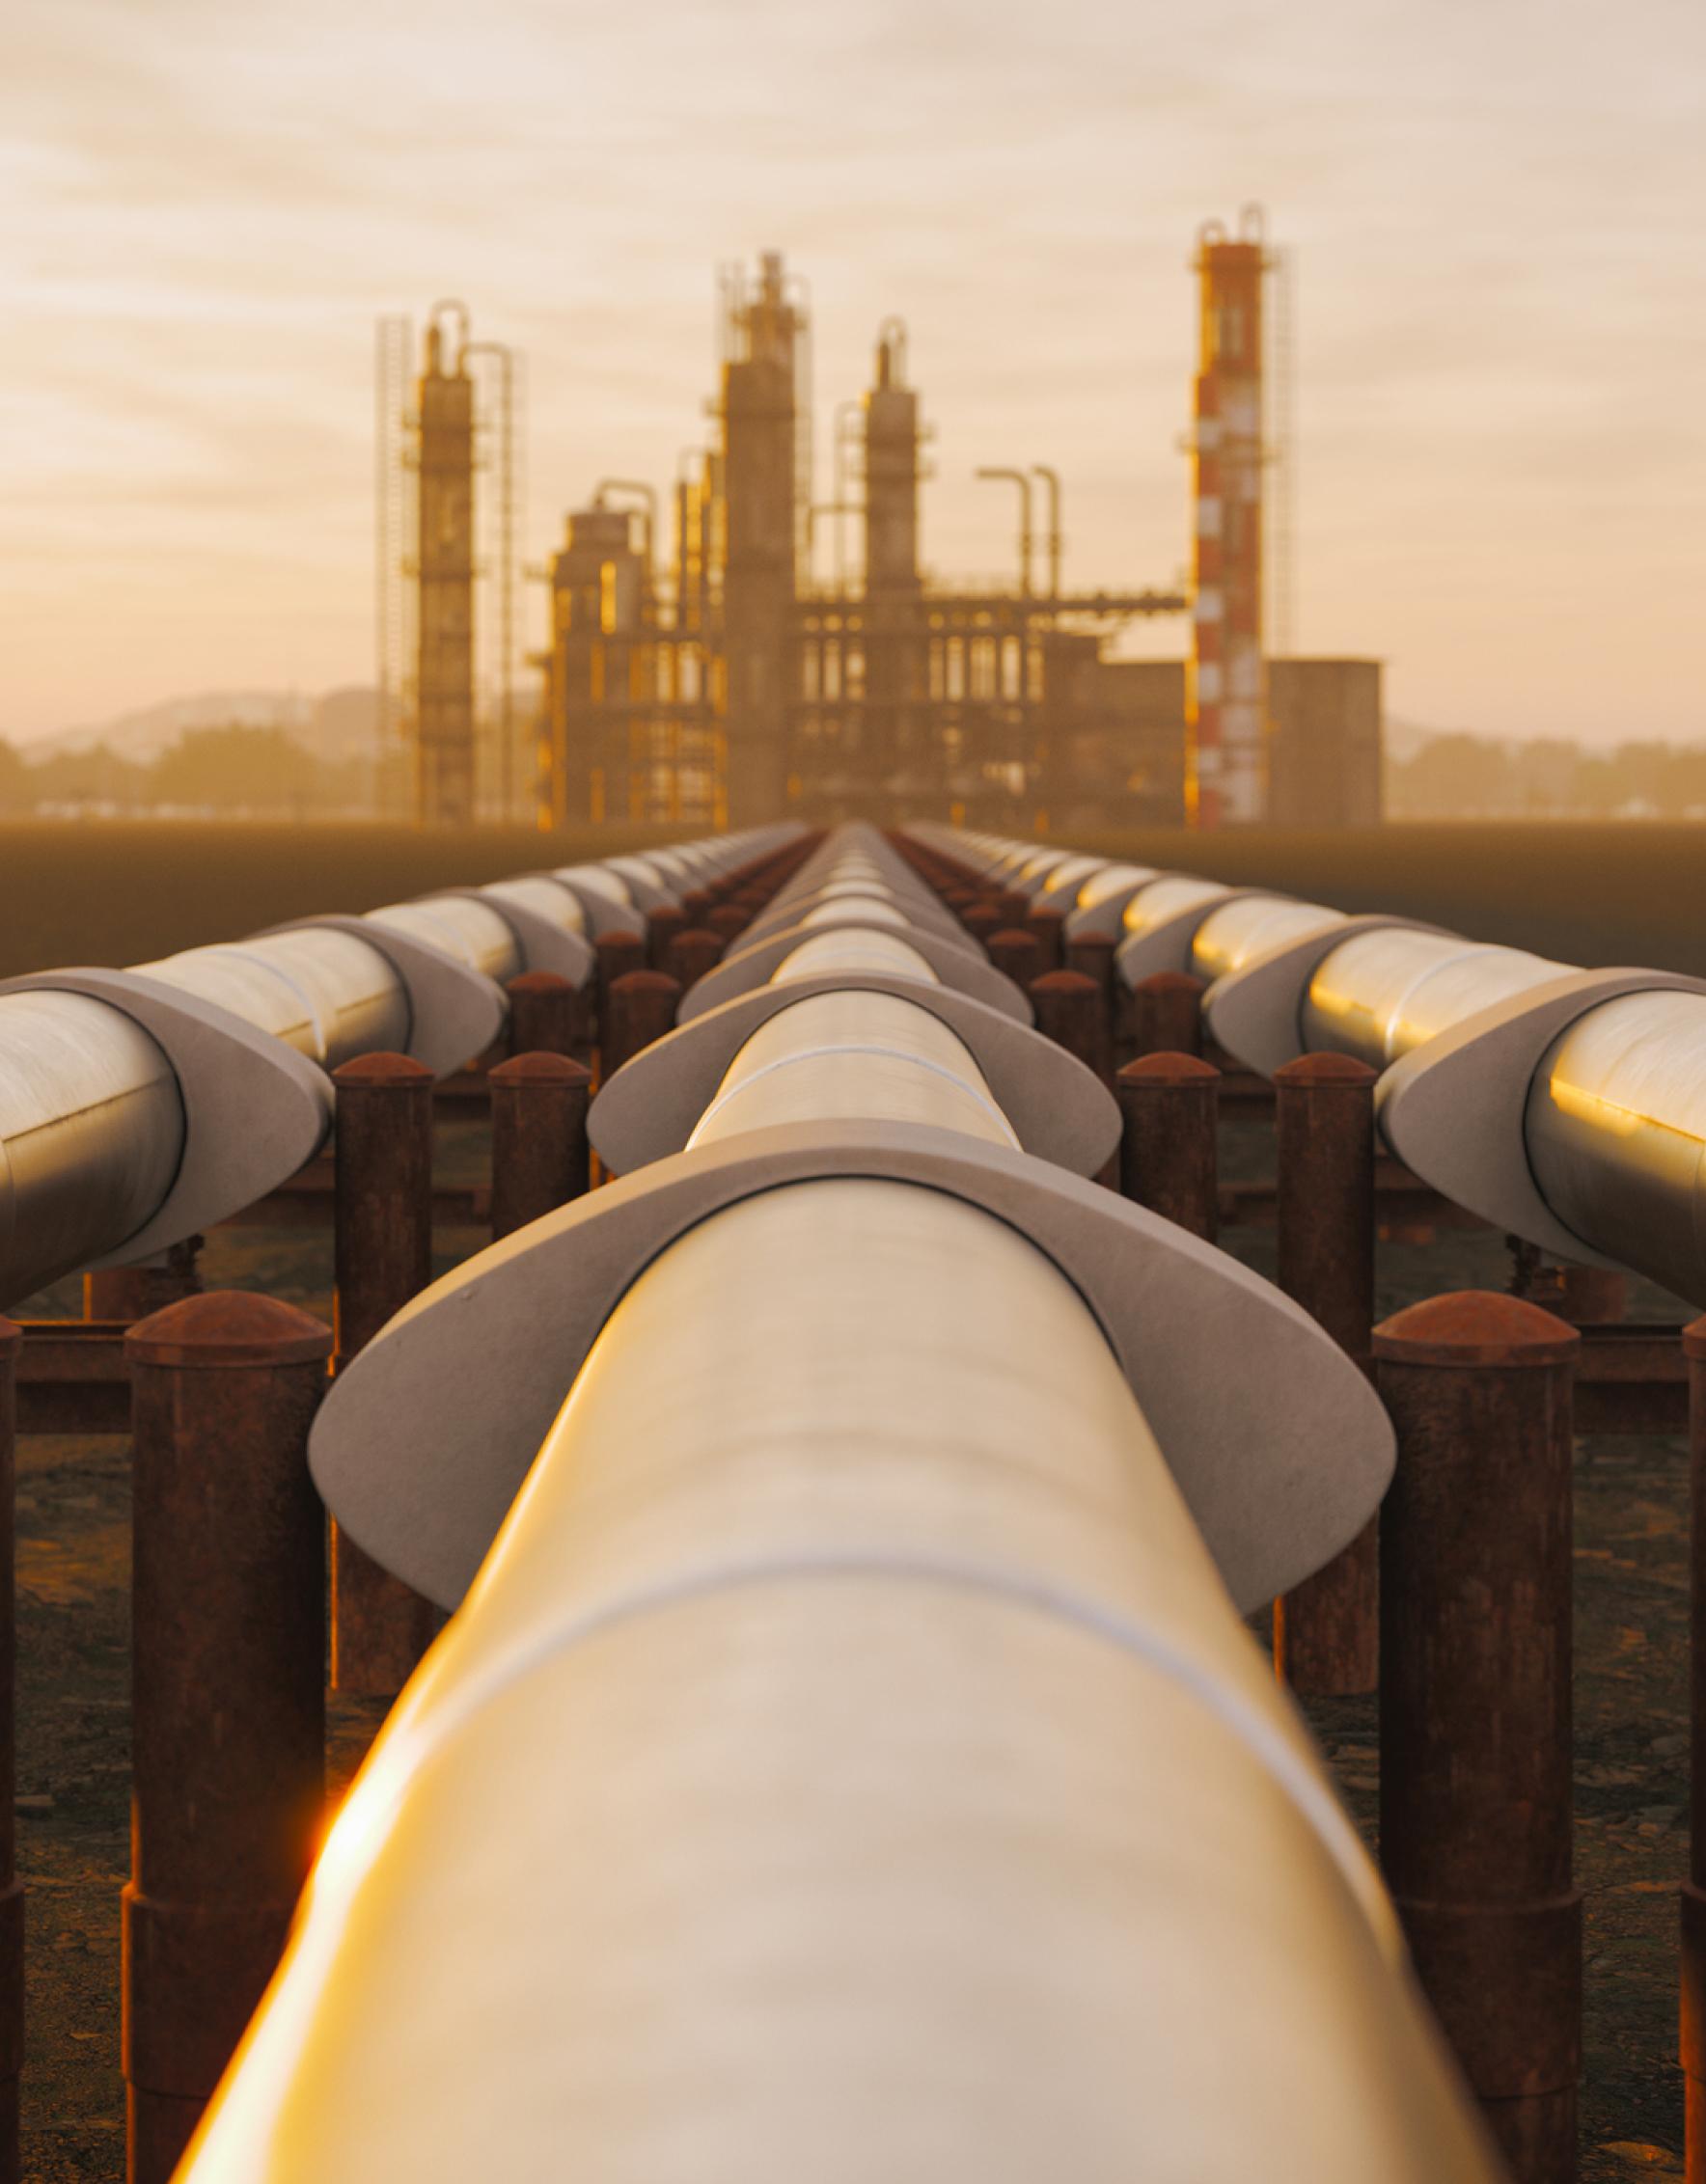 Steel oil pipes from refinery in desert during sunset.